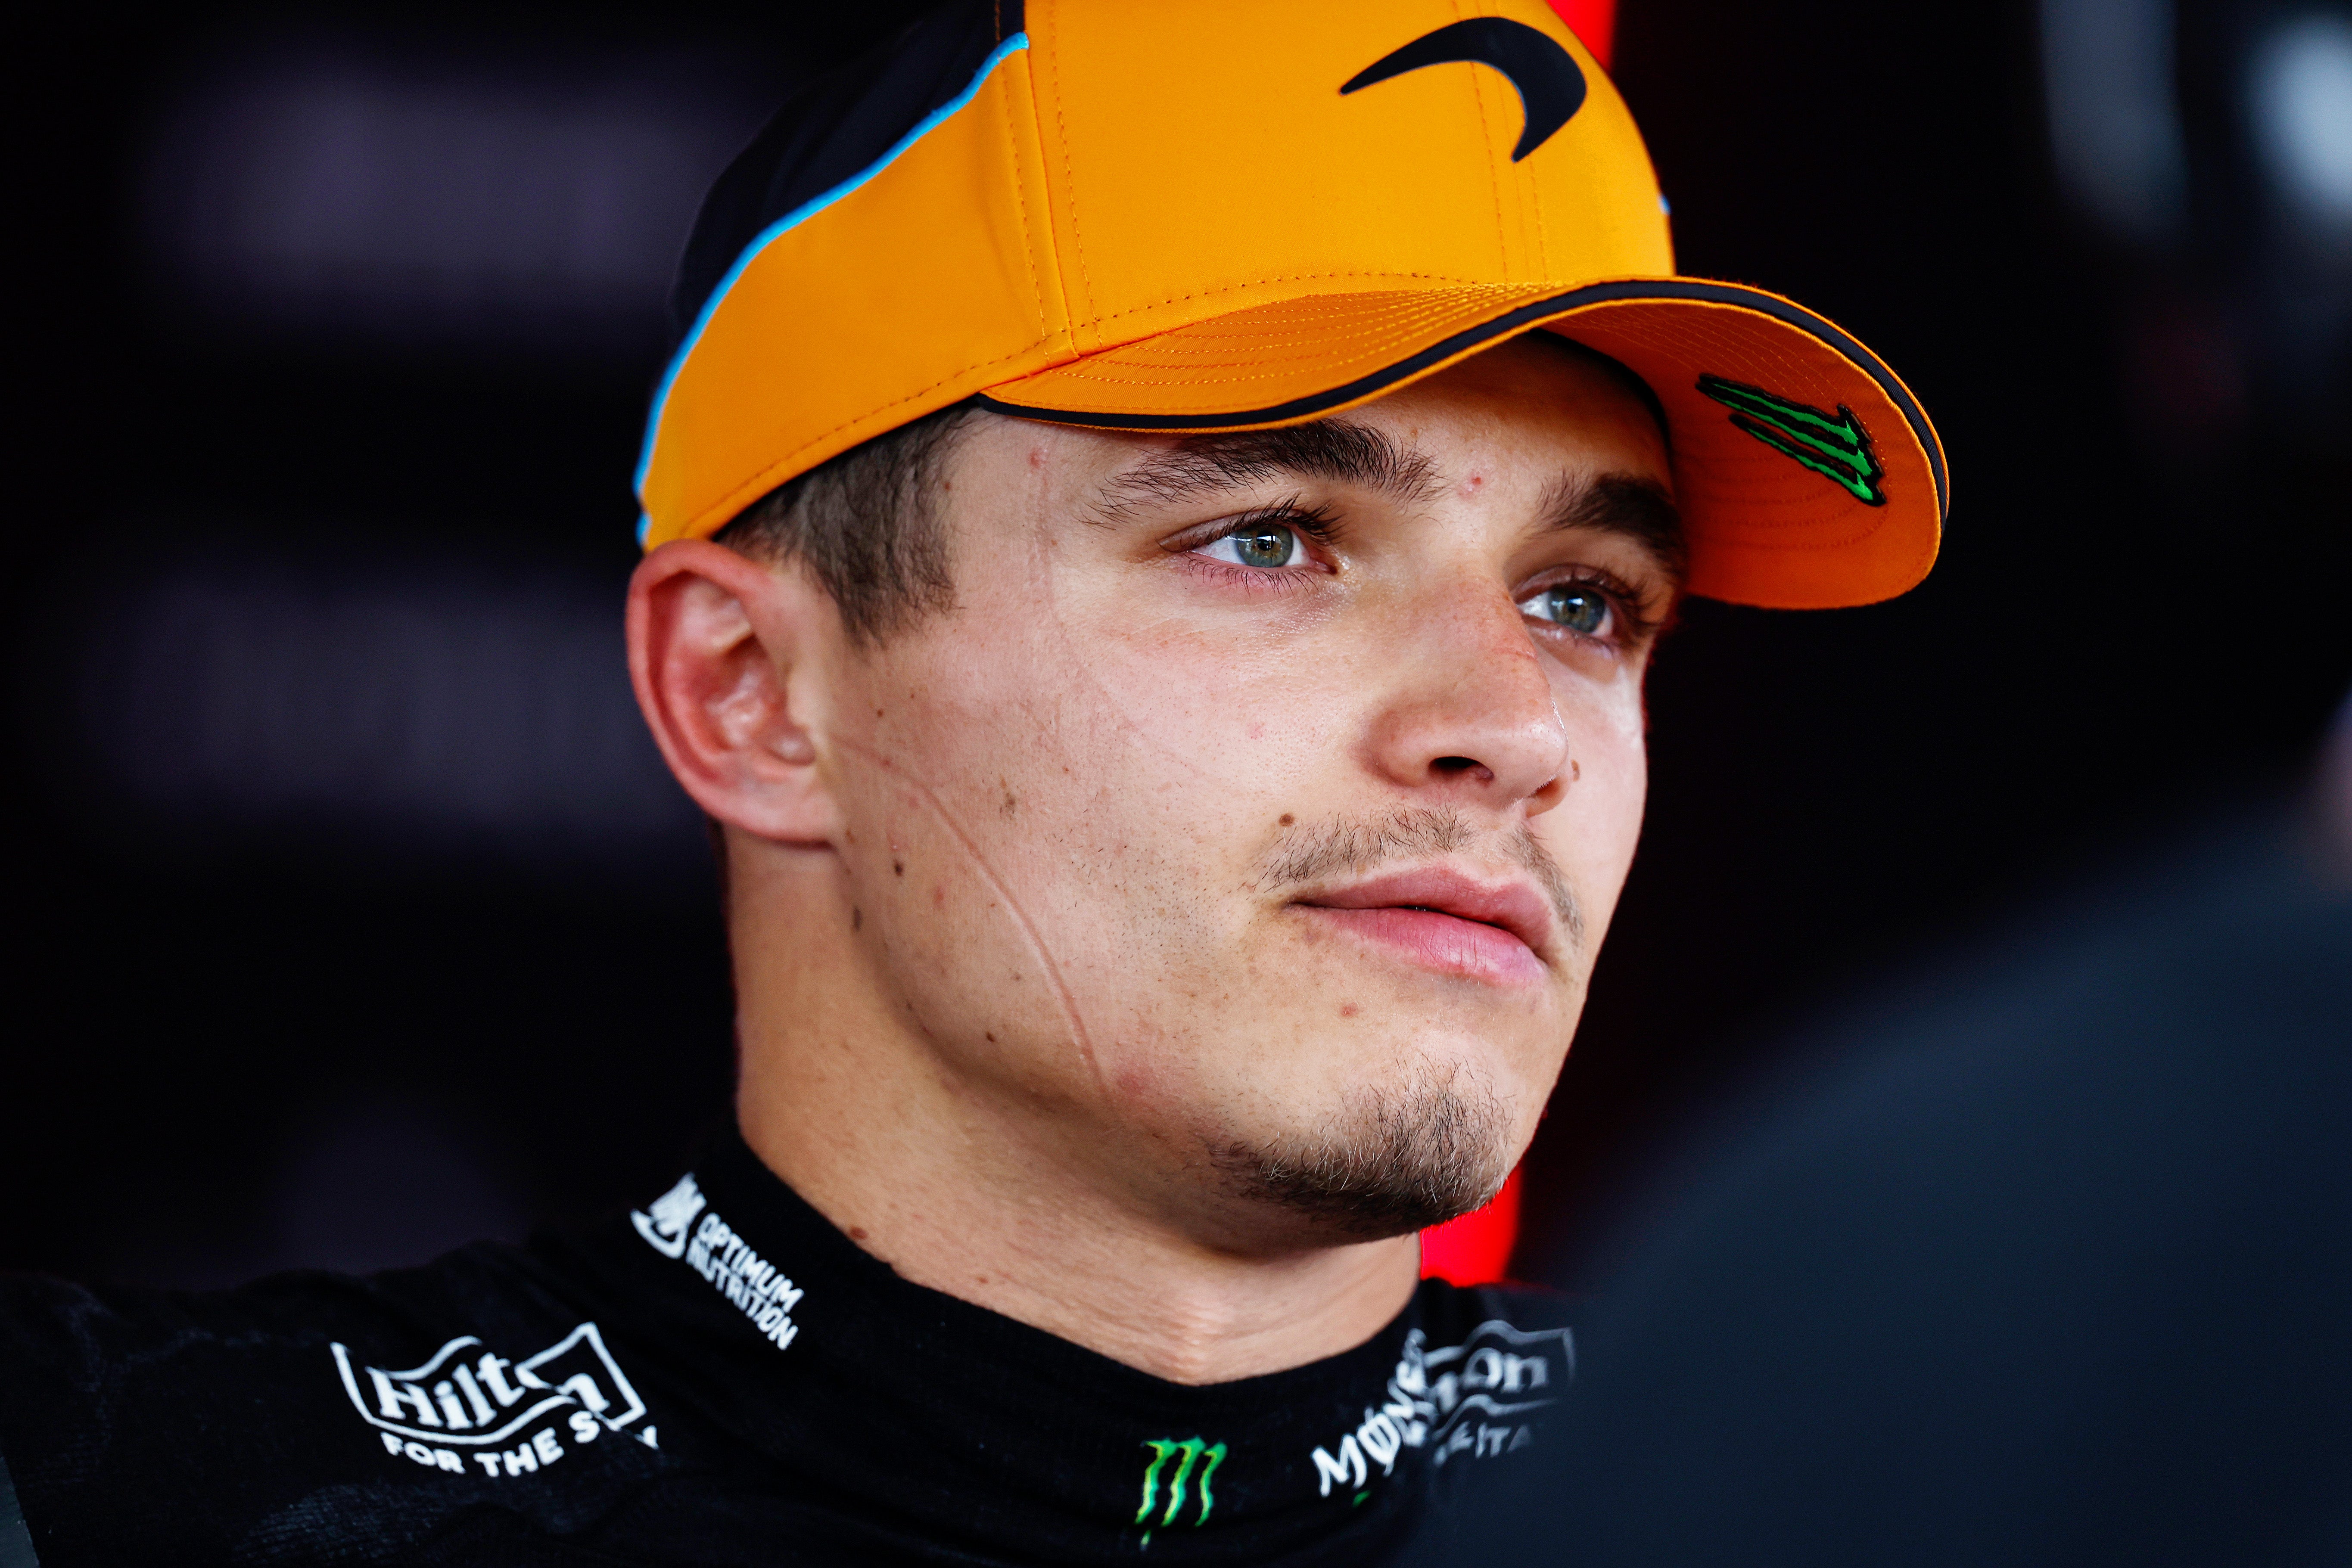 Lando Norris was fuming with Verstappen after the race